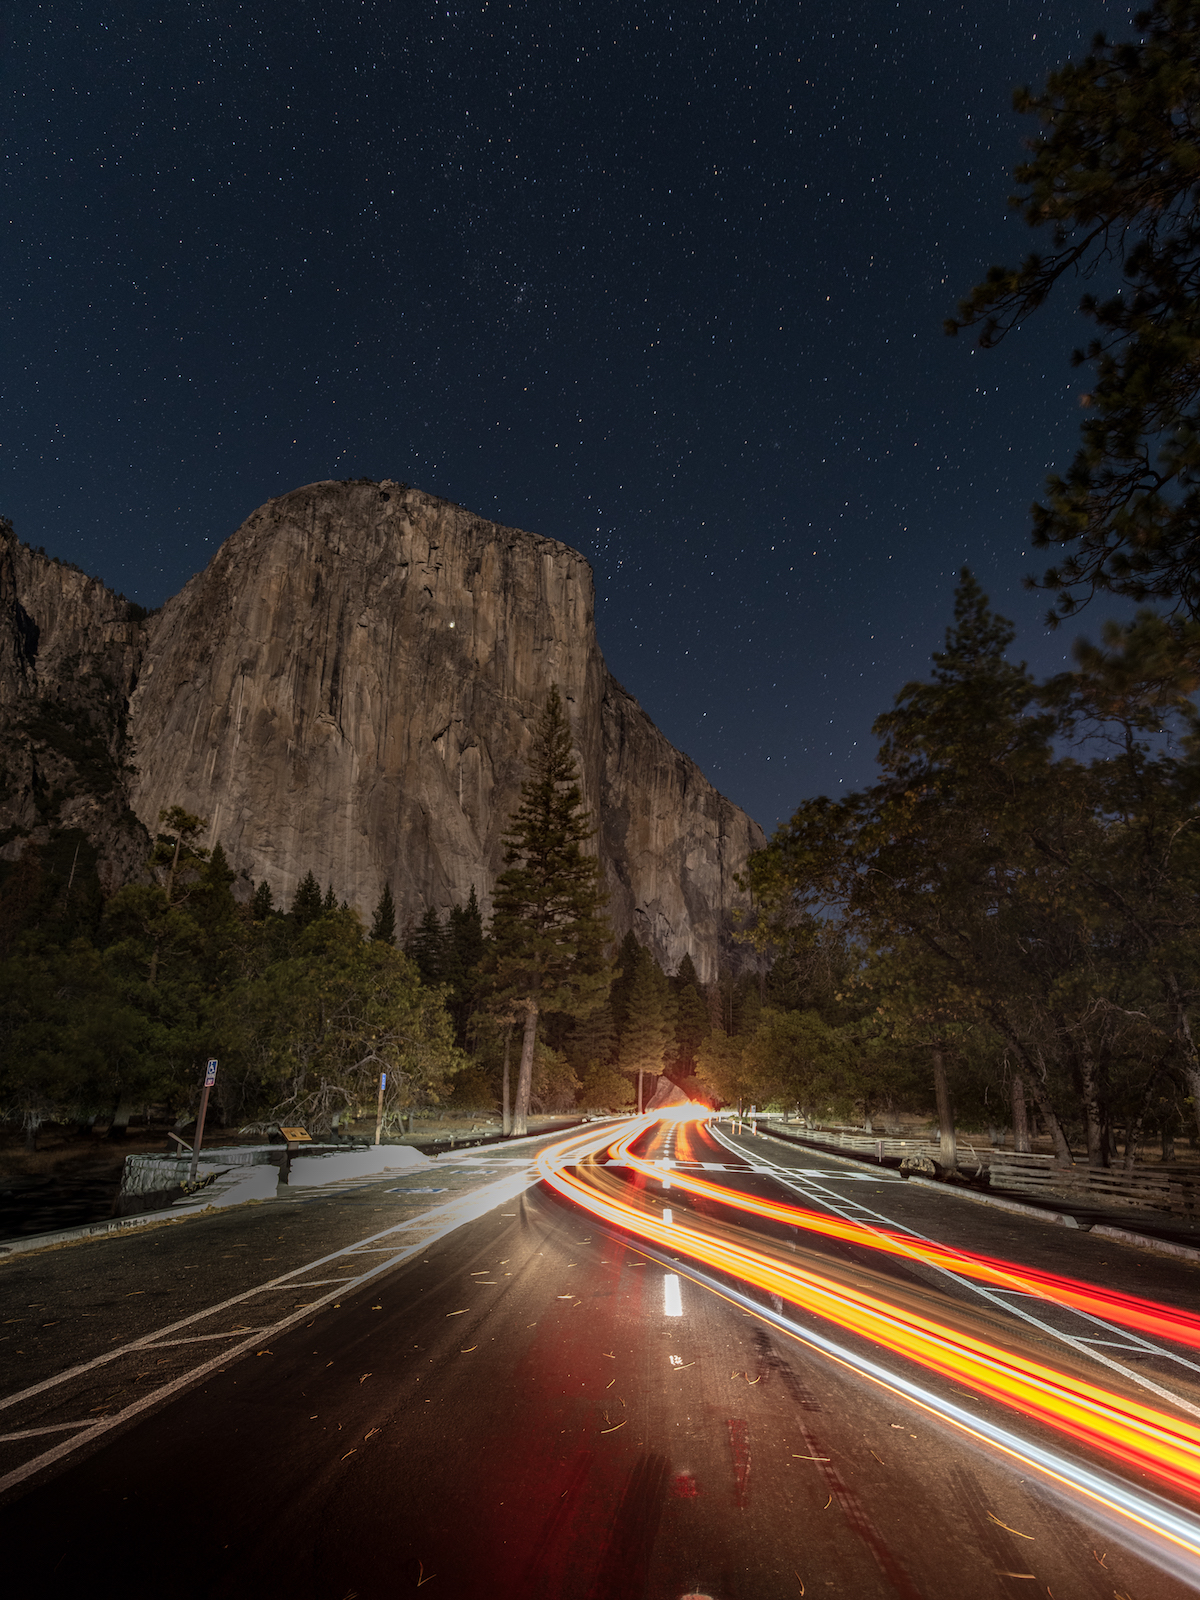 Roadway and light trails at night, El Capitan, Yosemite Valley, California, United States of America